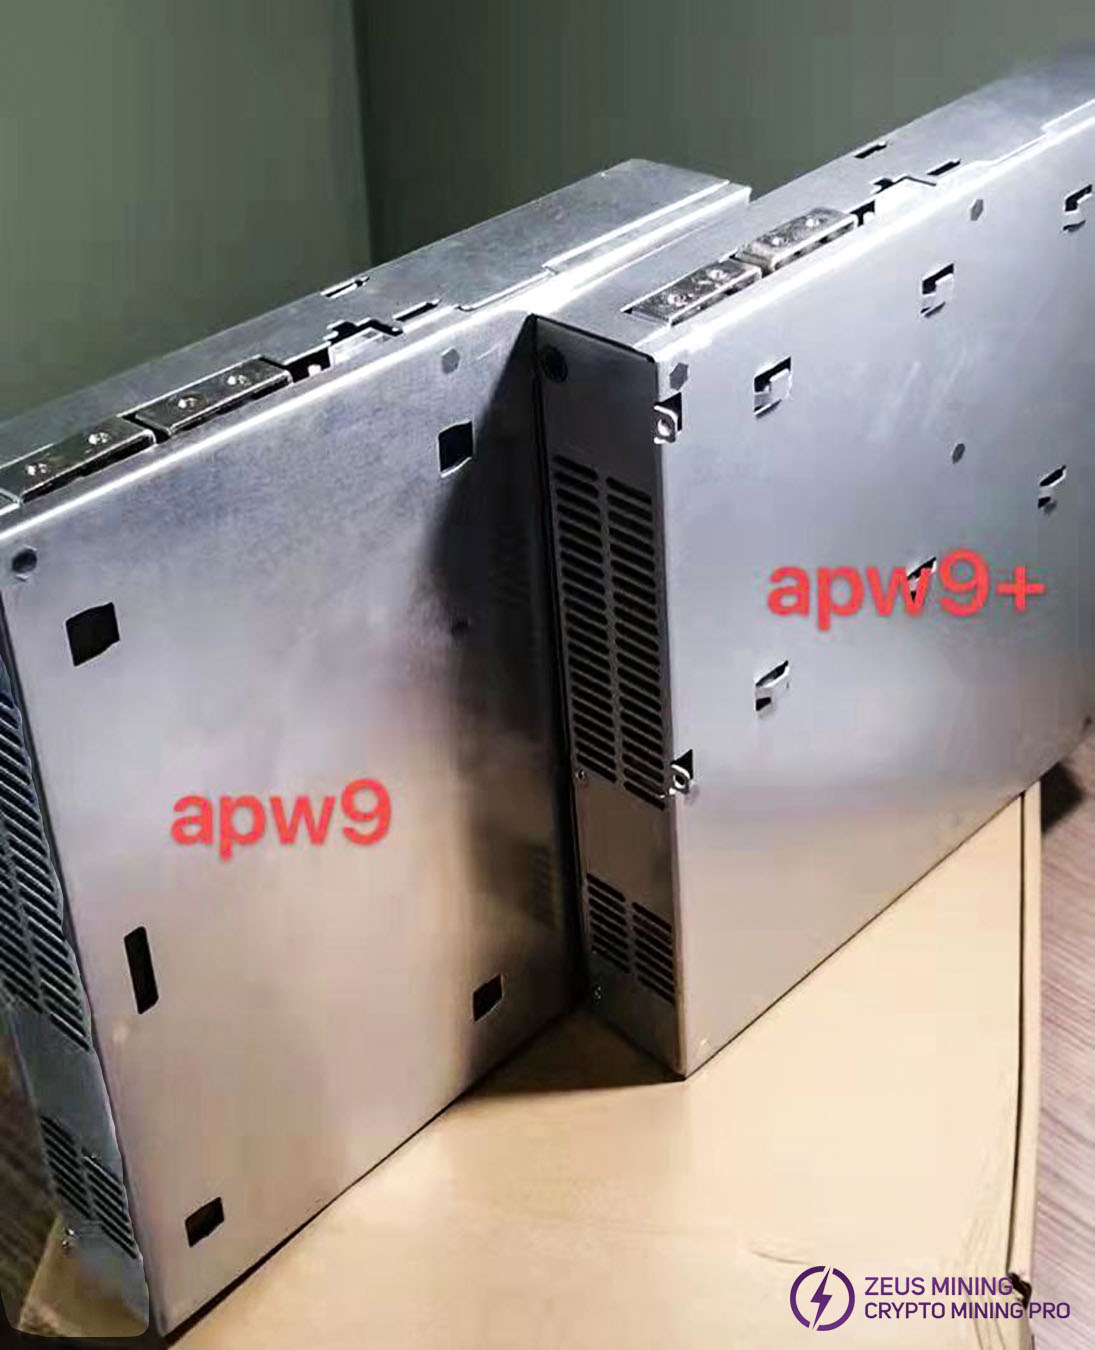 APW9 and APW9+ comparison chart